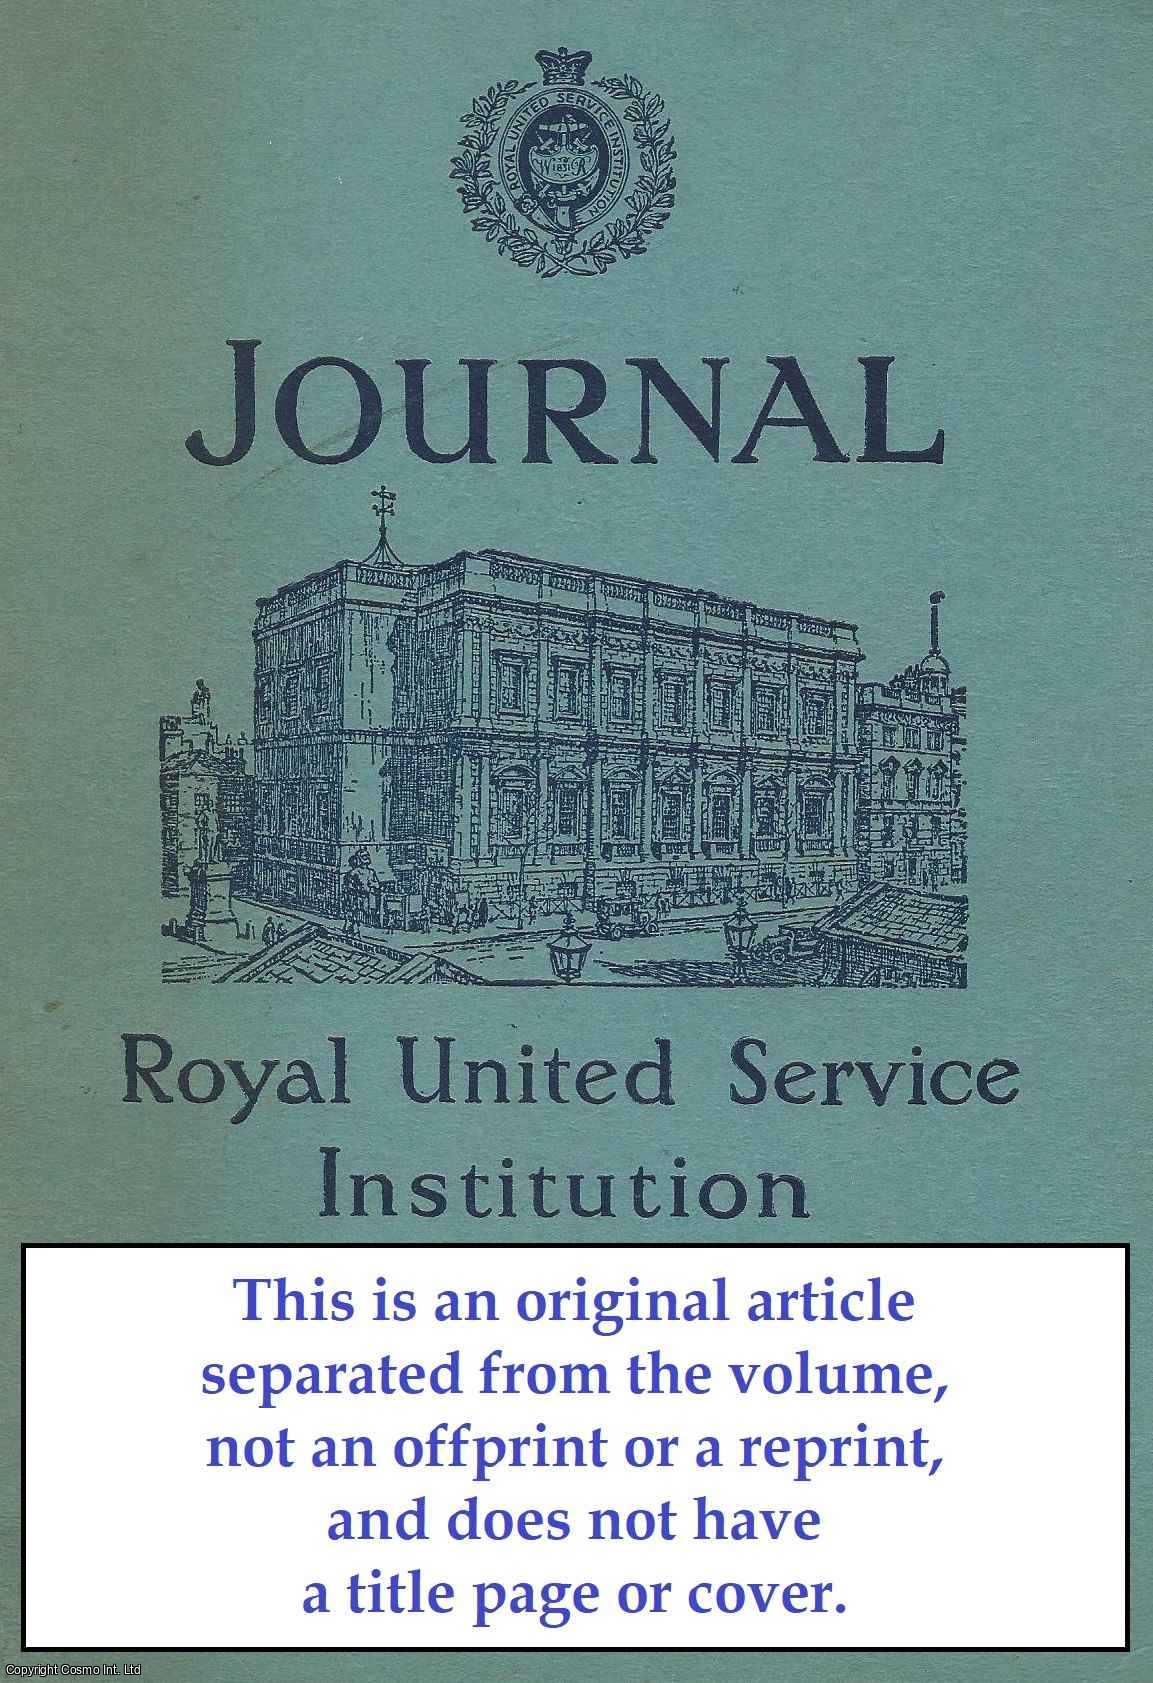 Charles Jones - Forward Strategy in Germany. An original article from The Royal United Service Institution Journal, 1968.